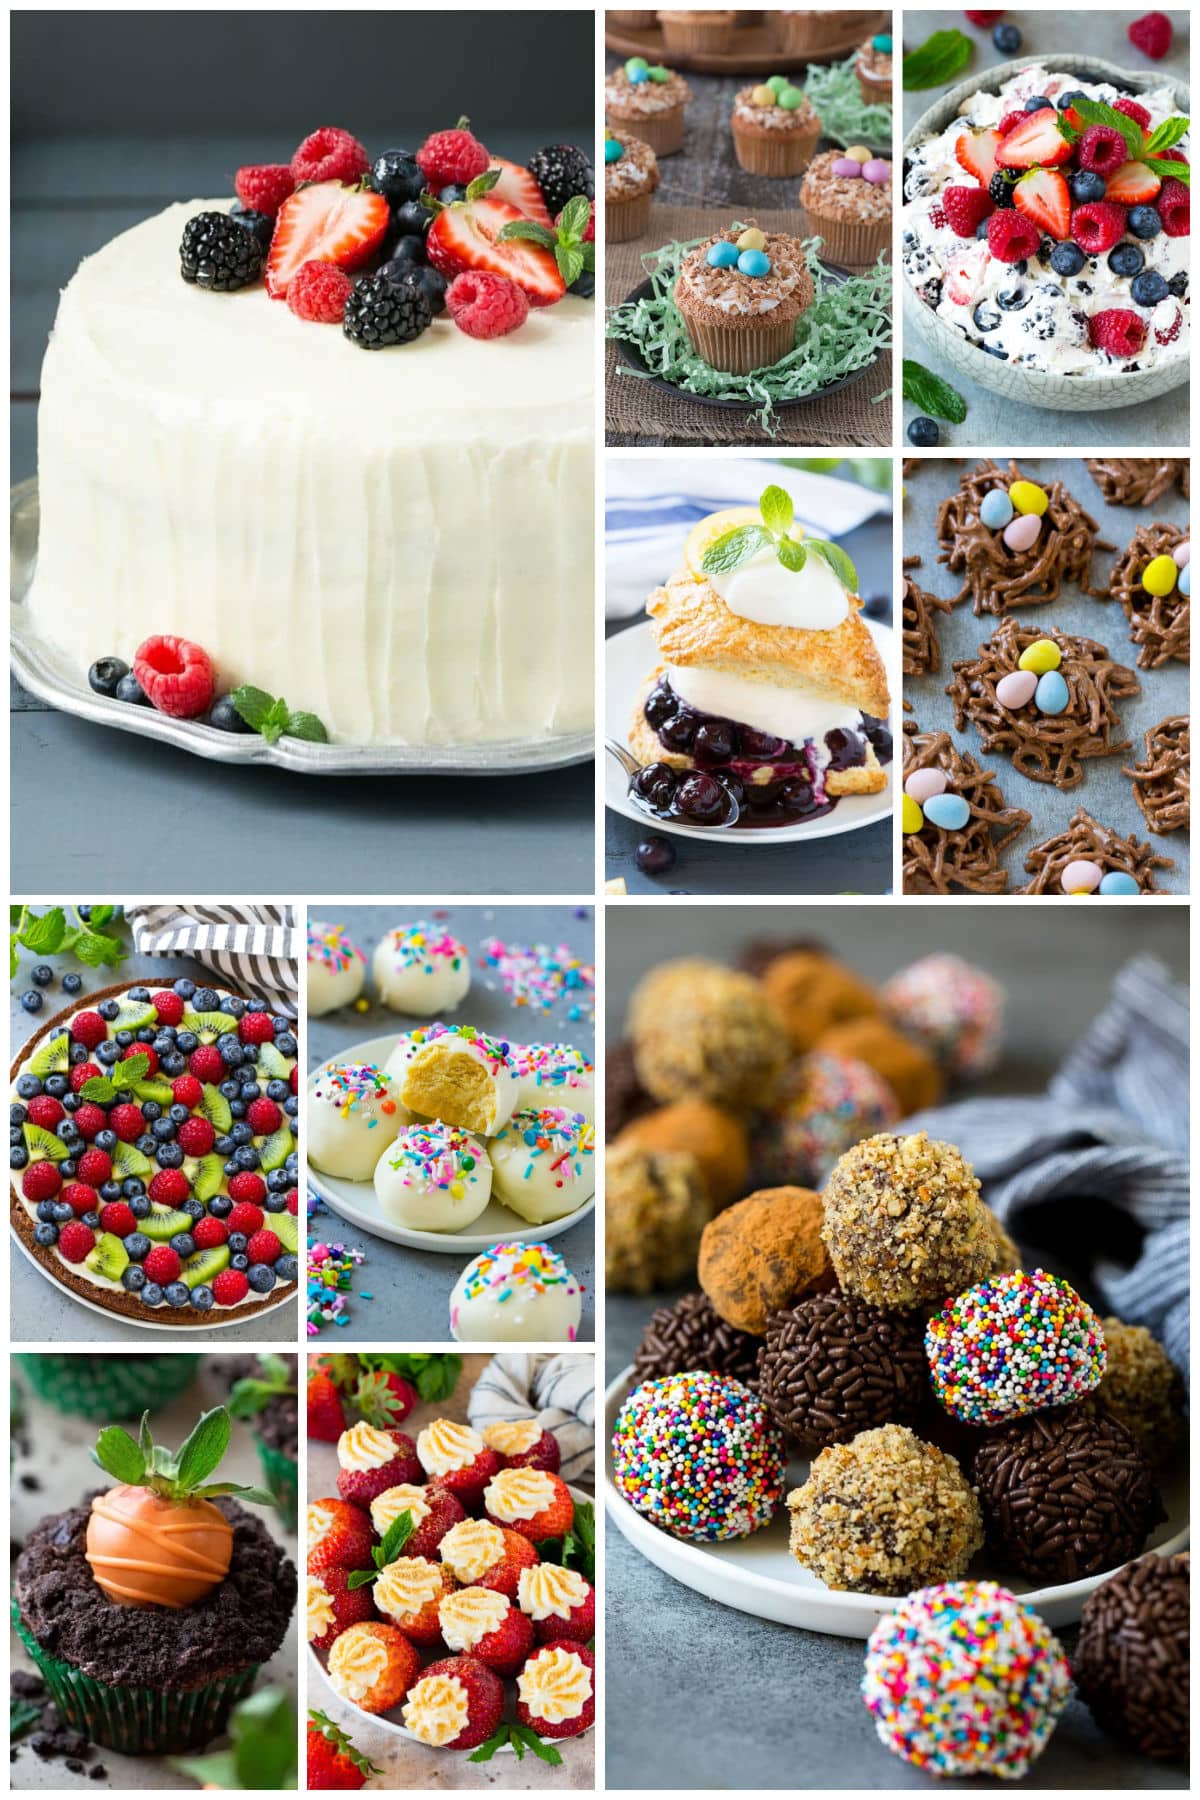 A collection of Easter dessert recipes such as chocolate truffles, cheesecake stuffed strawberries and berry Chantilly cake.